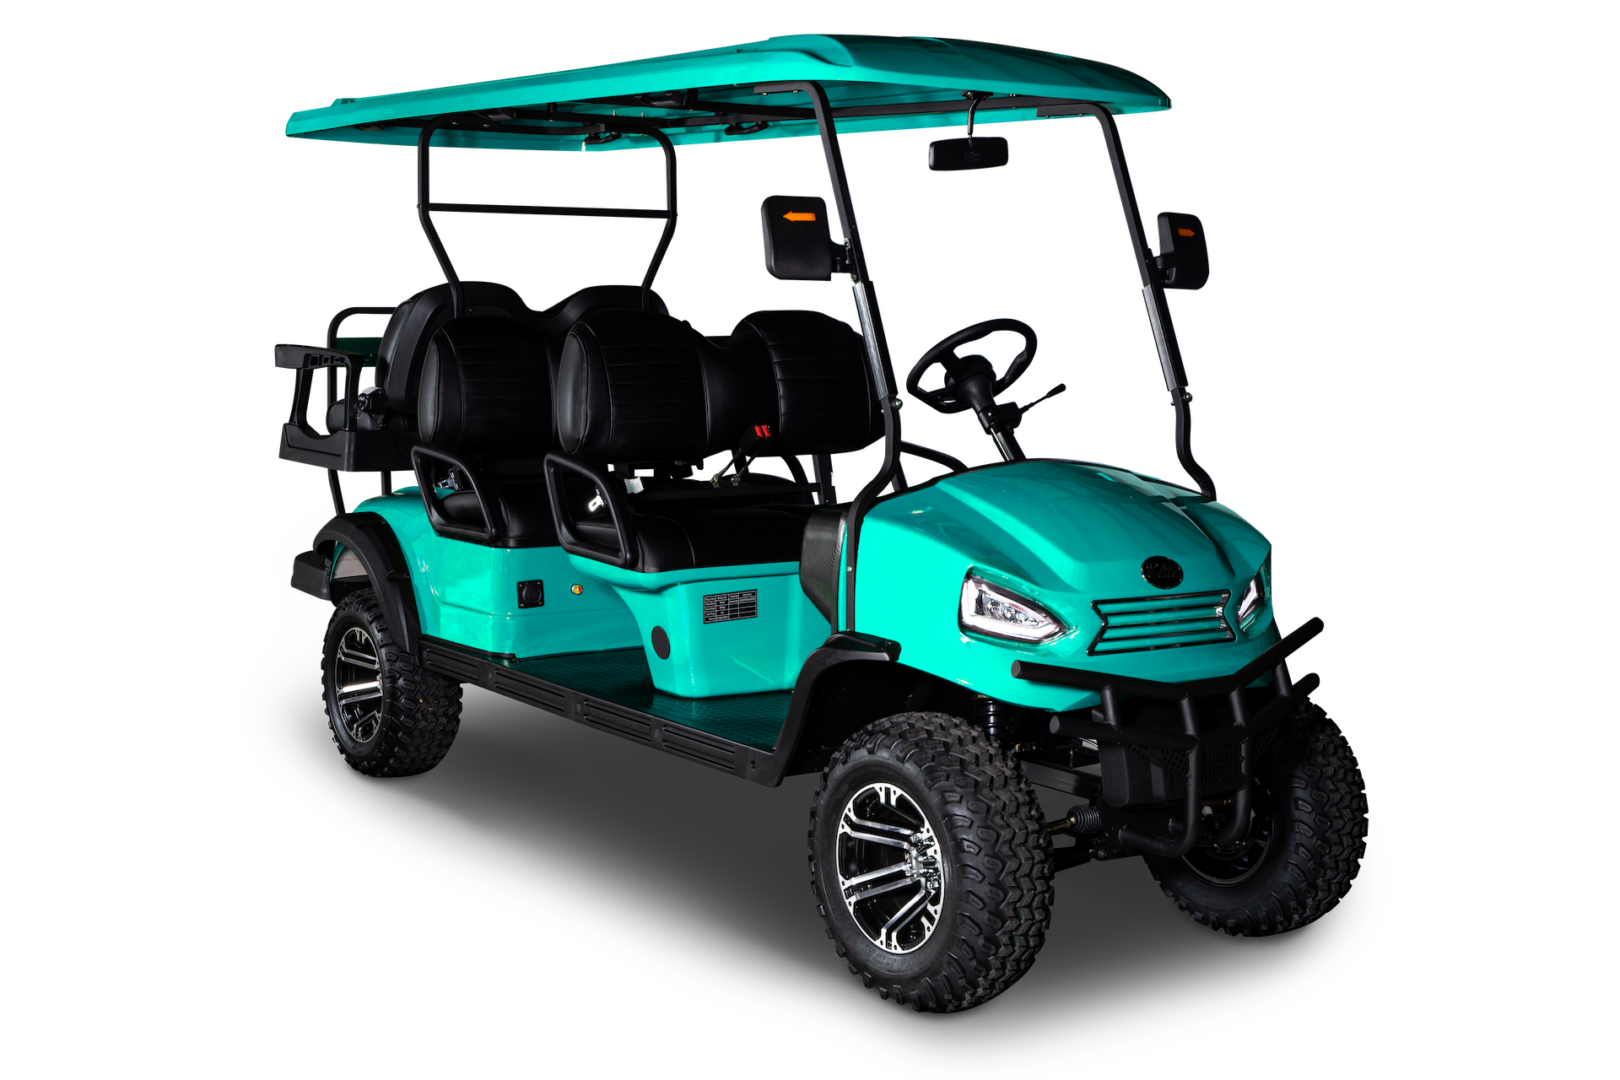 A golf cart is shown in blue.